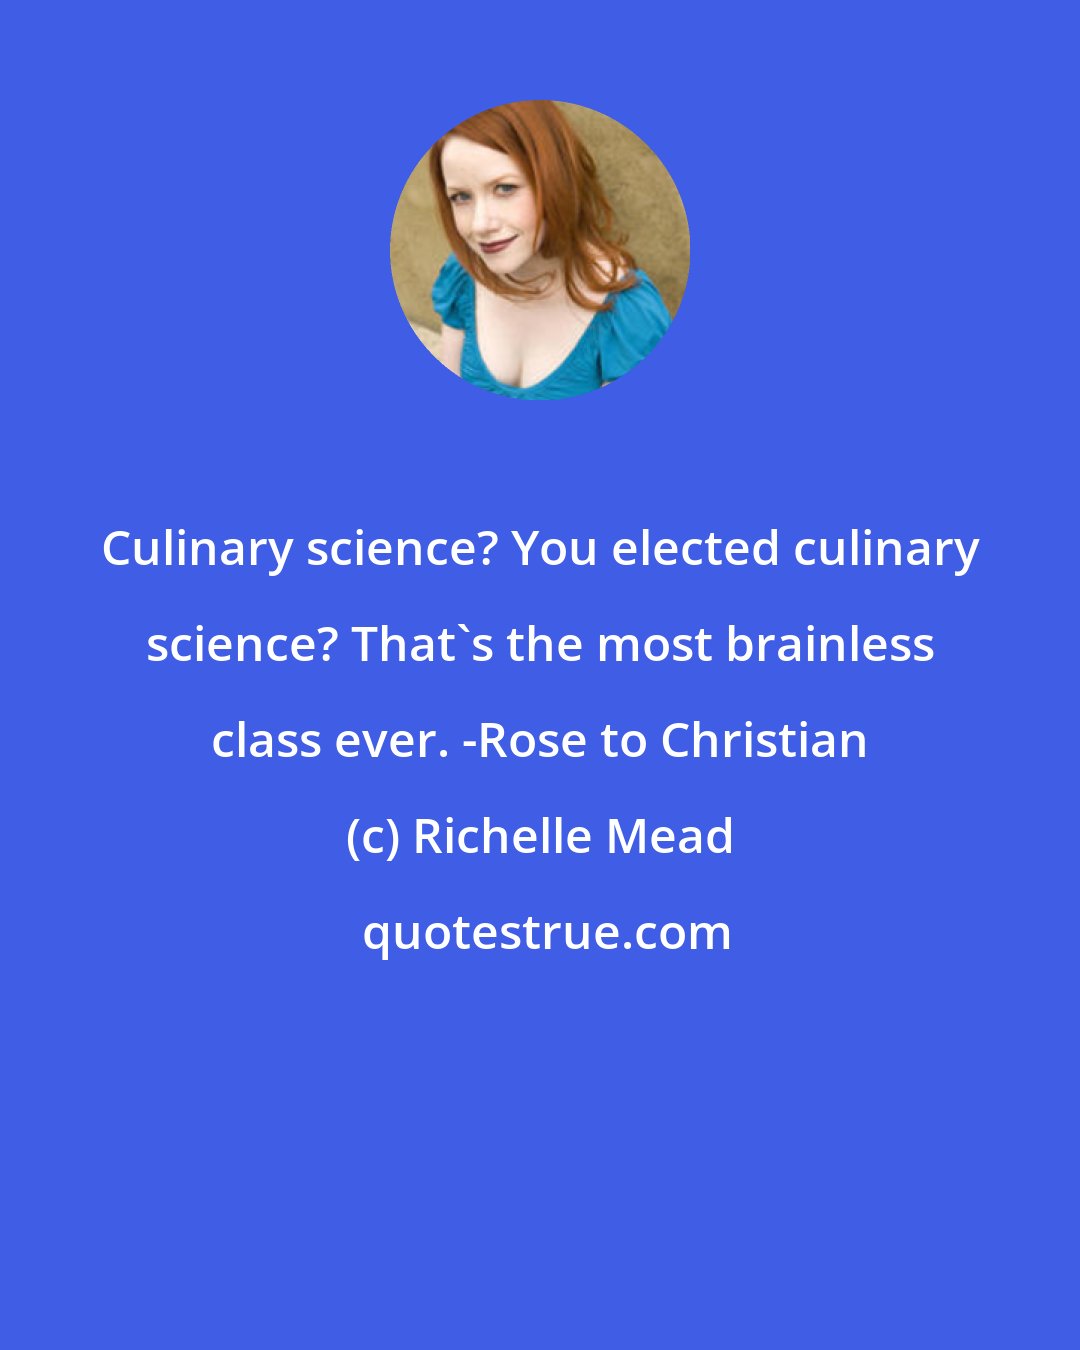 Richelle Mead: Culinary science? You elected culinary science? That's the most brainless class ever. -Rose to Christian